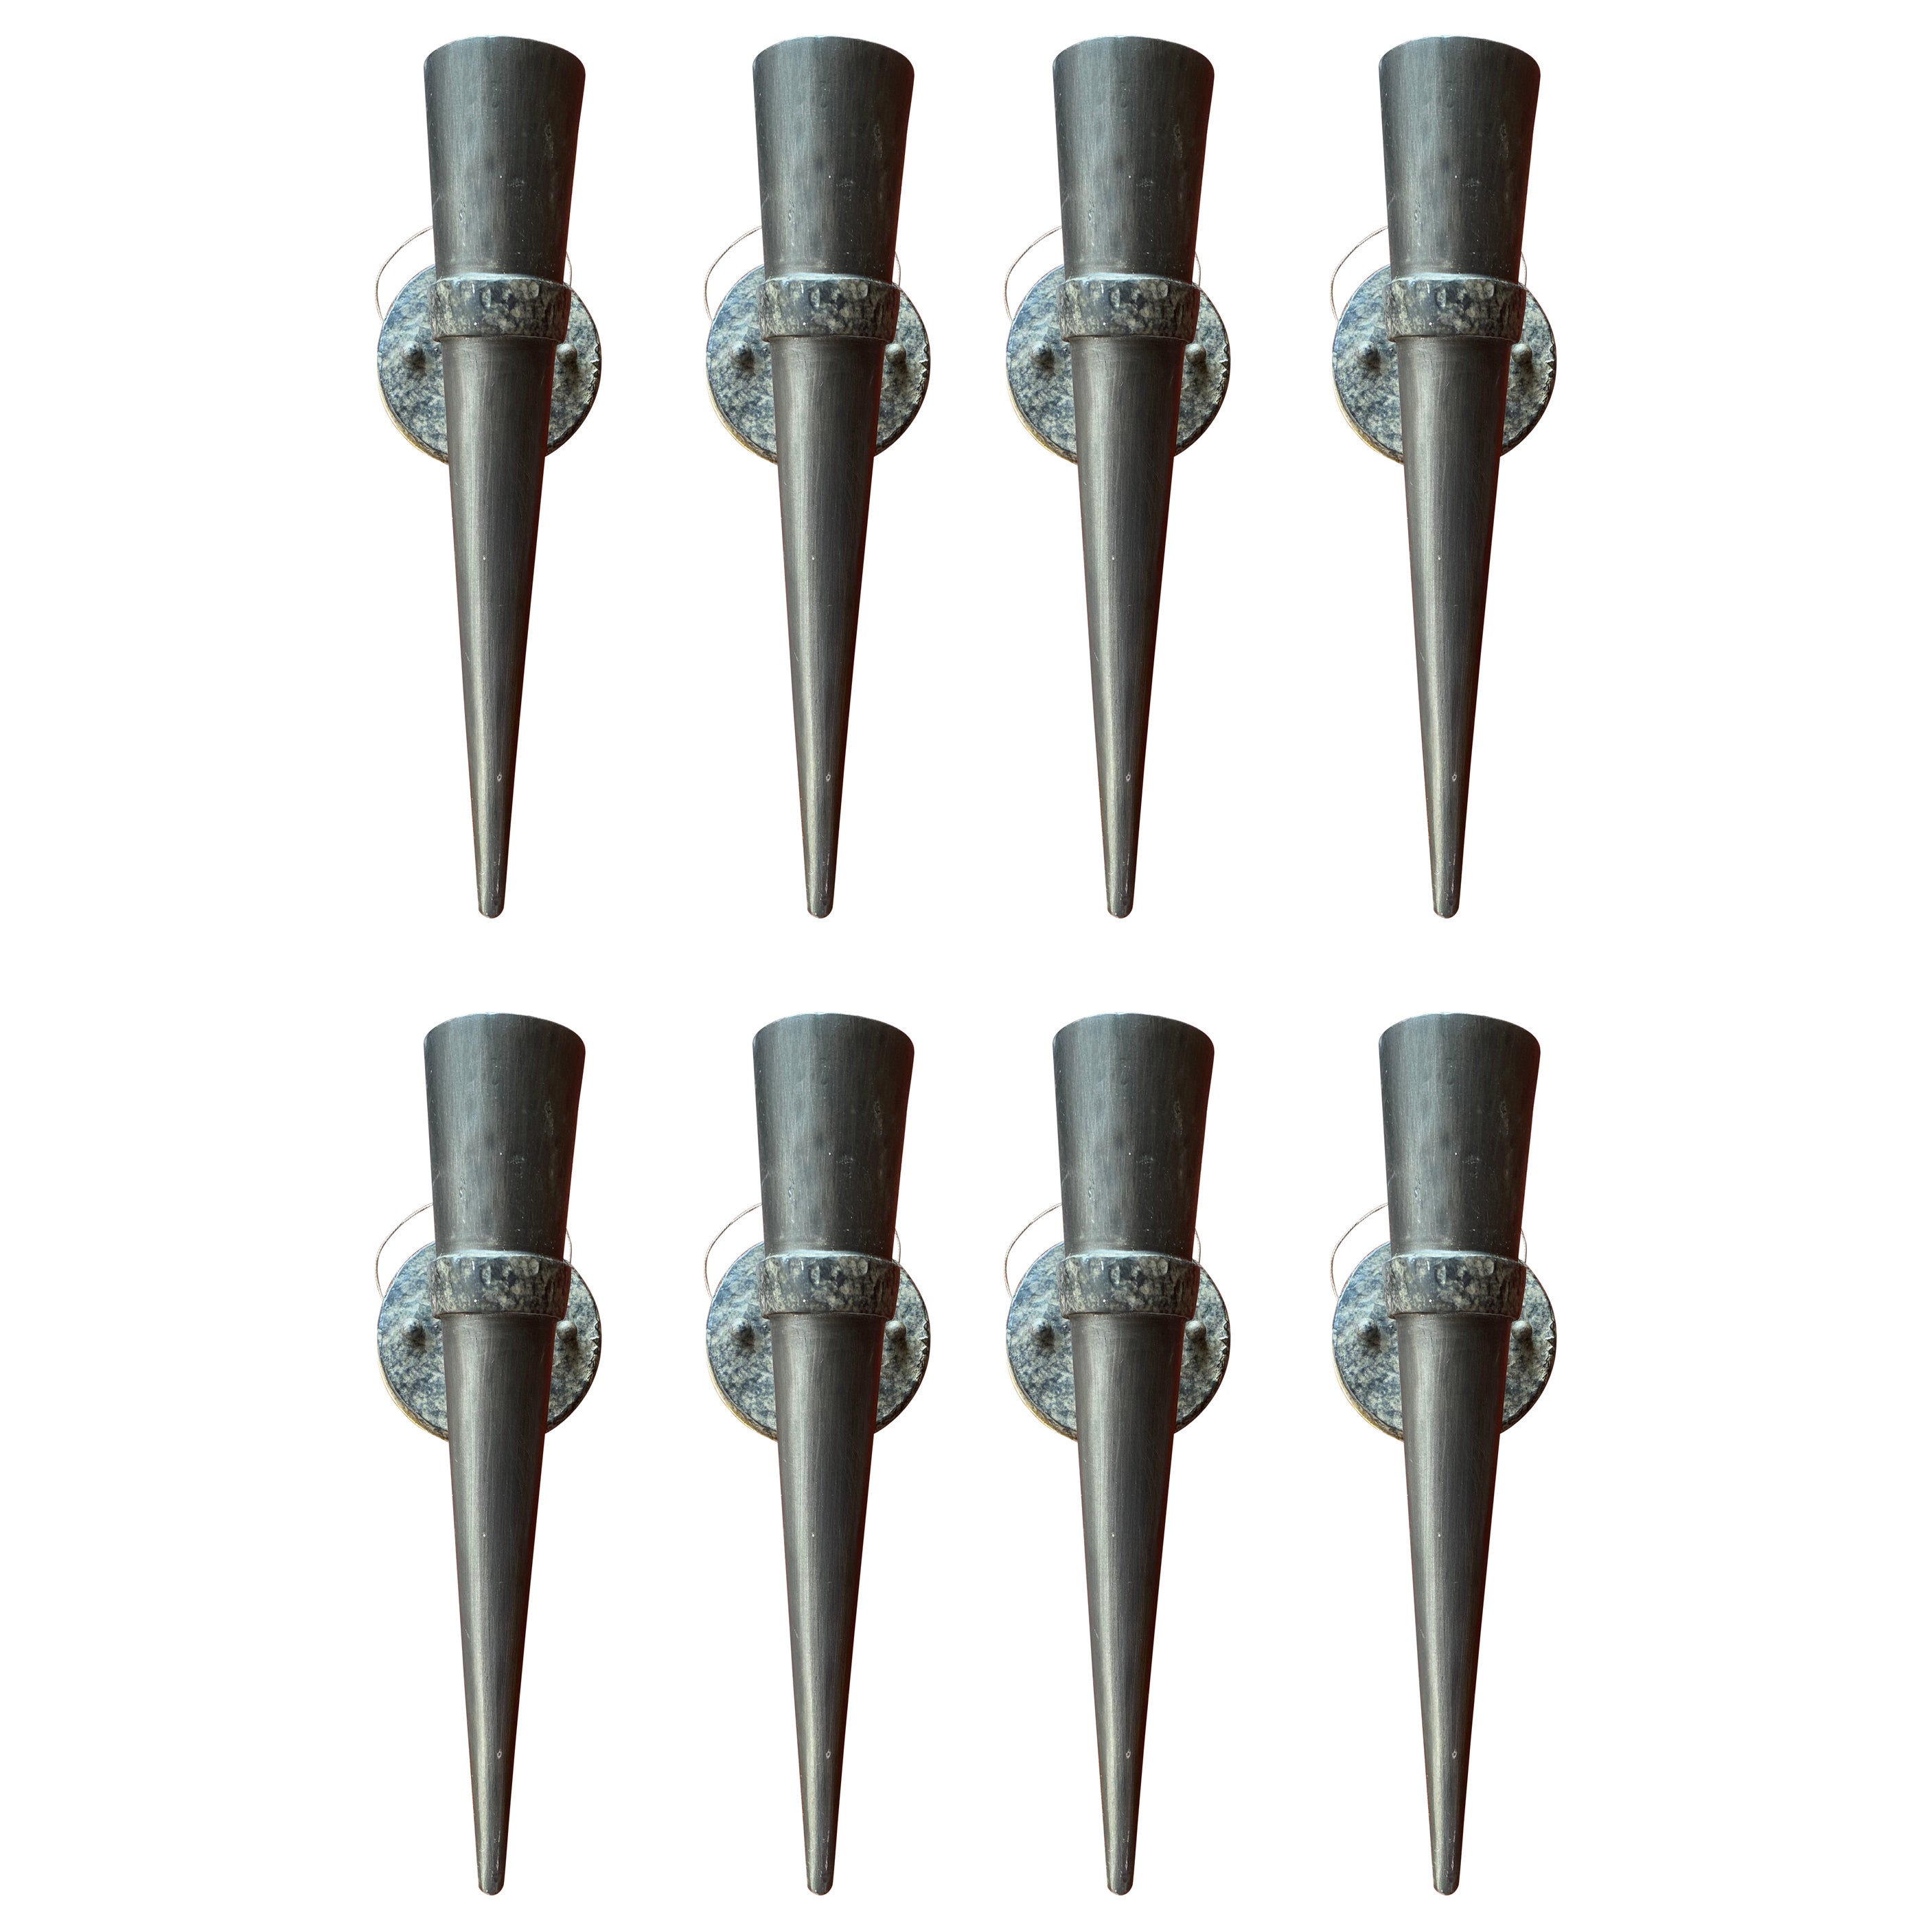 Set Of Eight Mediaeval Bronze Sconces, Great For A Wine Cellar. Priced per sconc